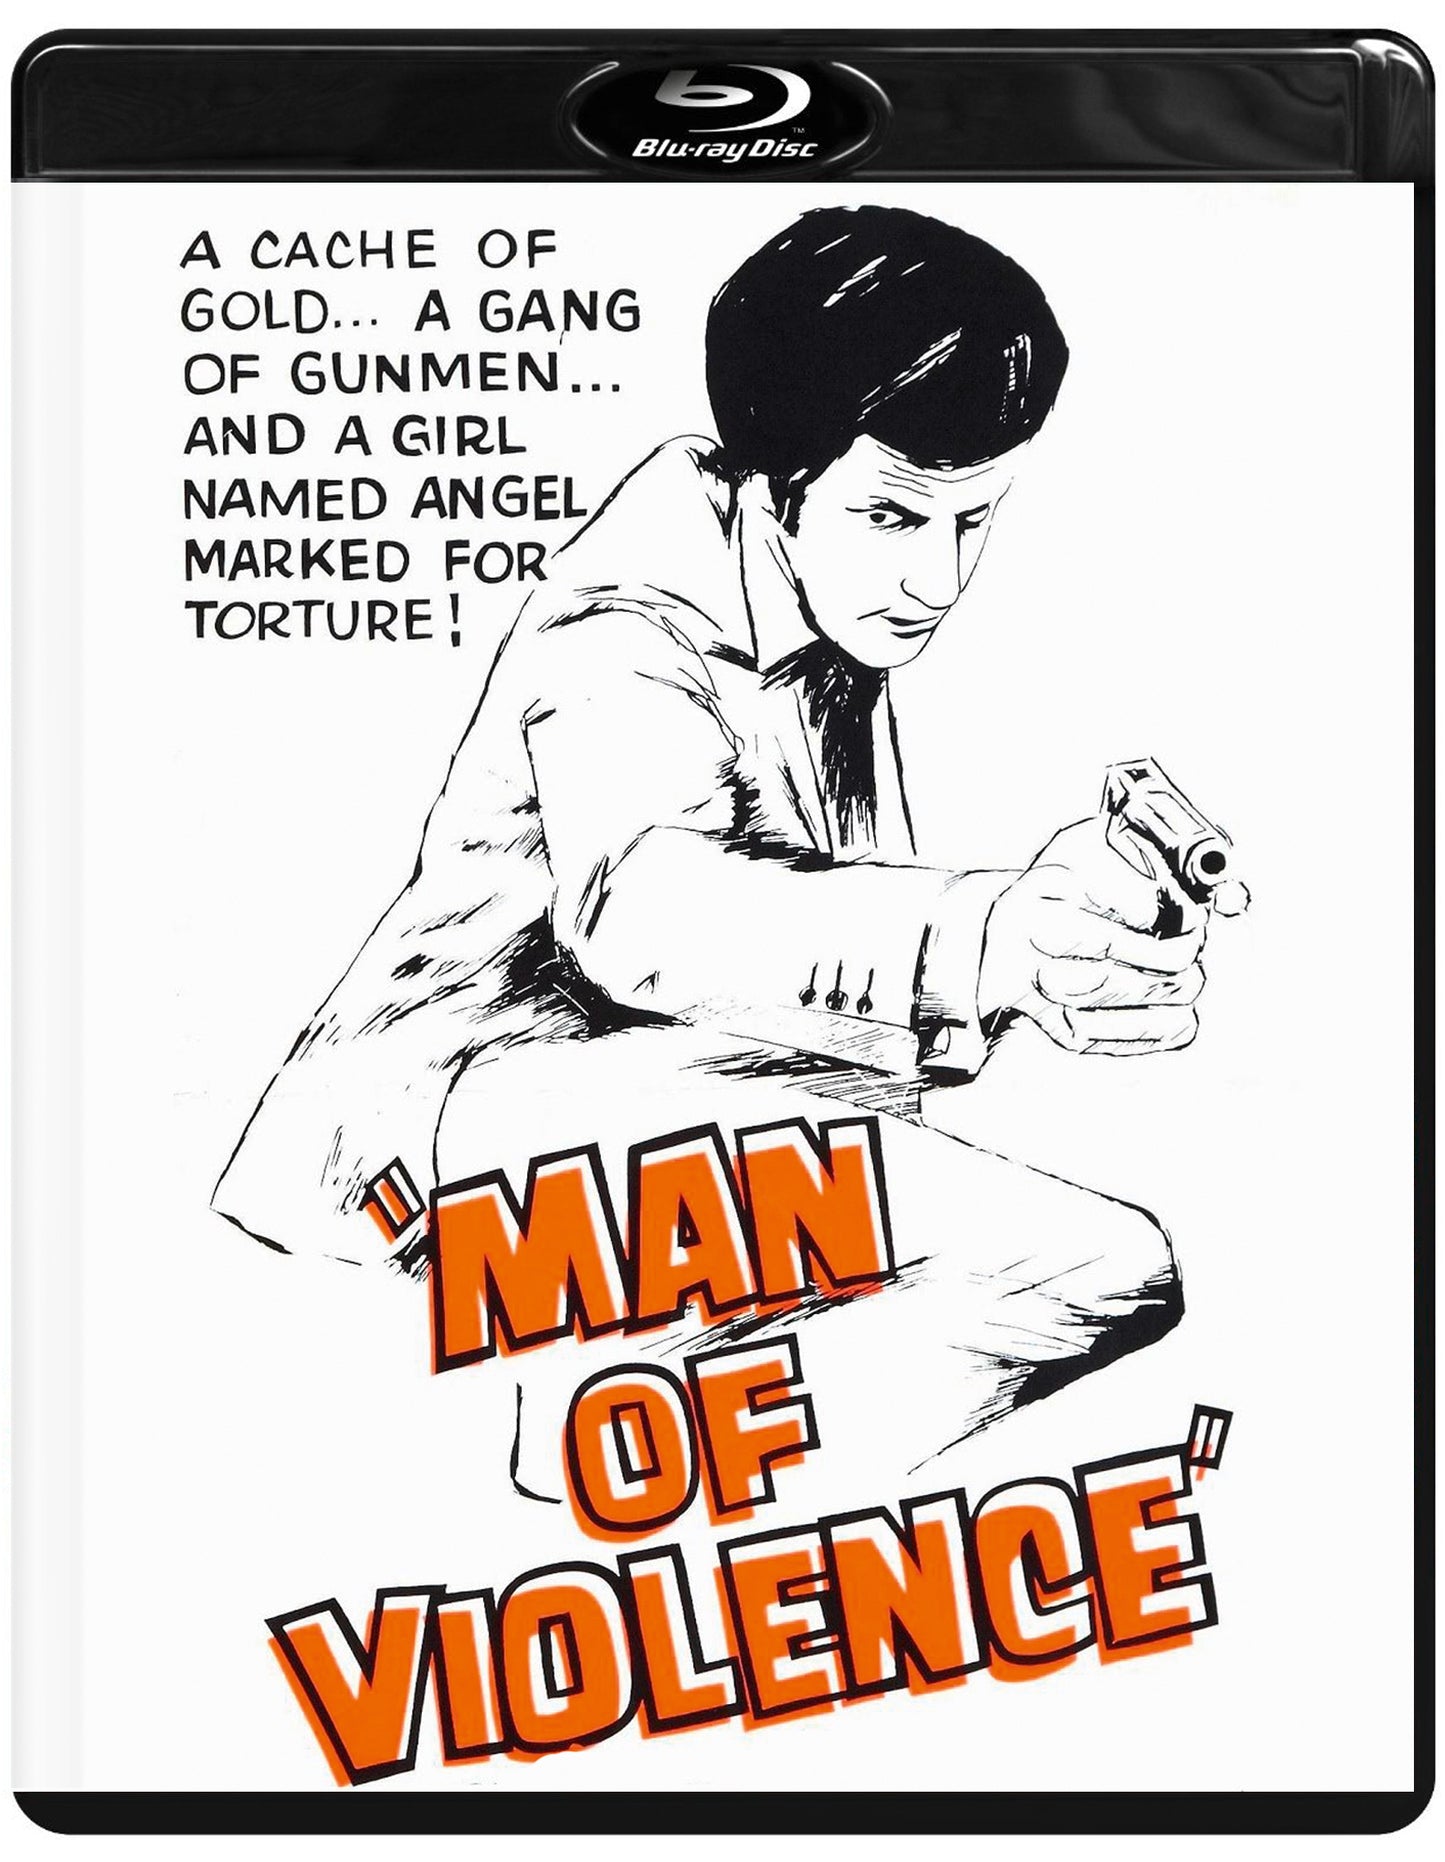 Man of Violence / The Big Switch